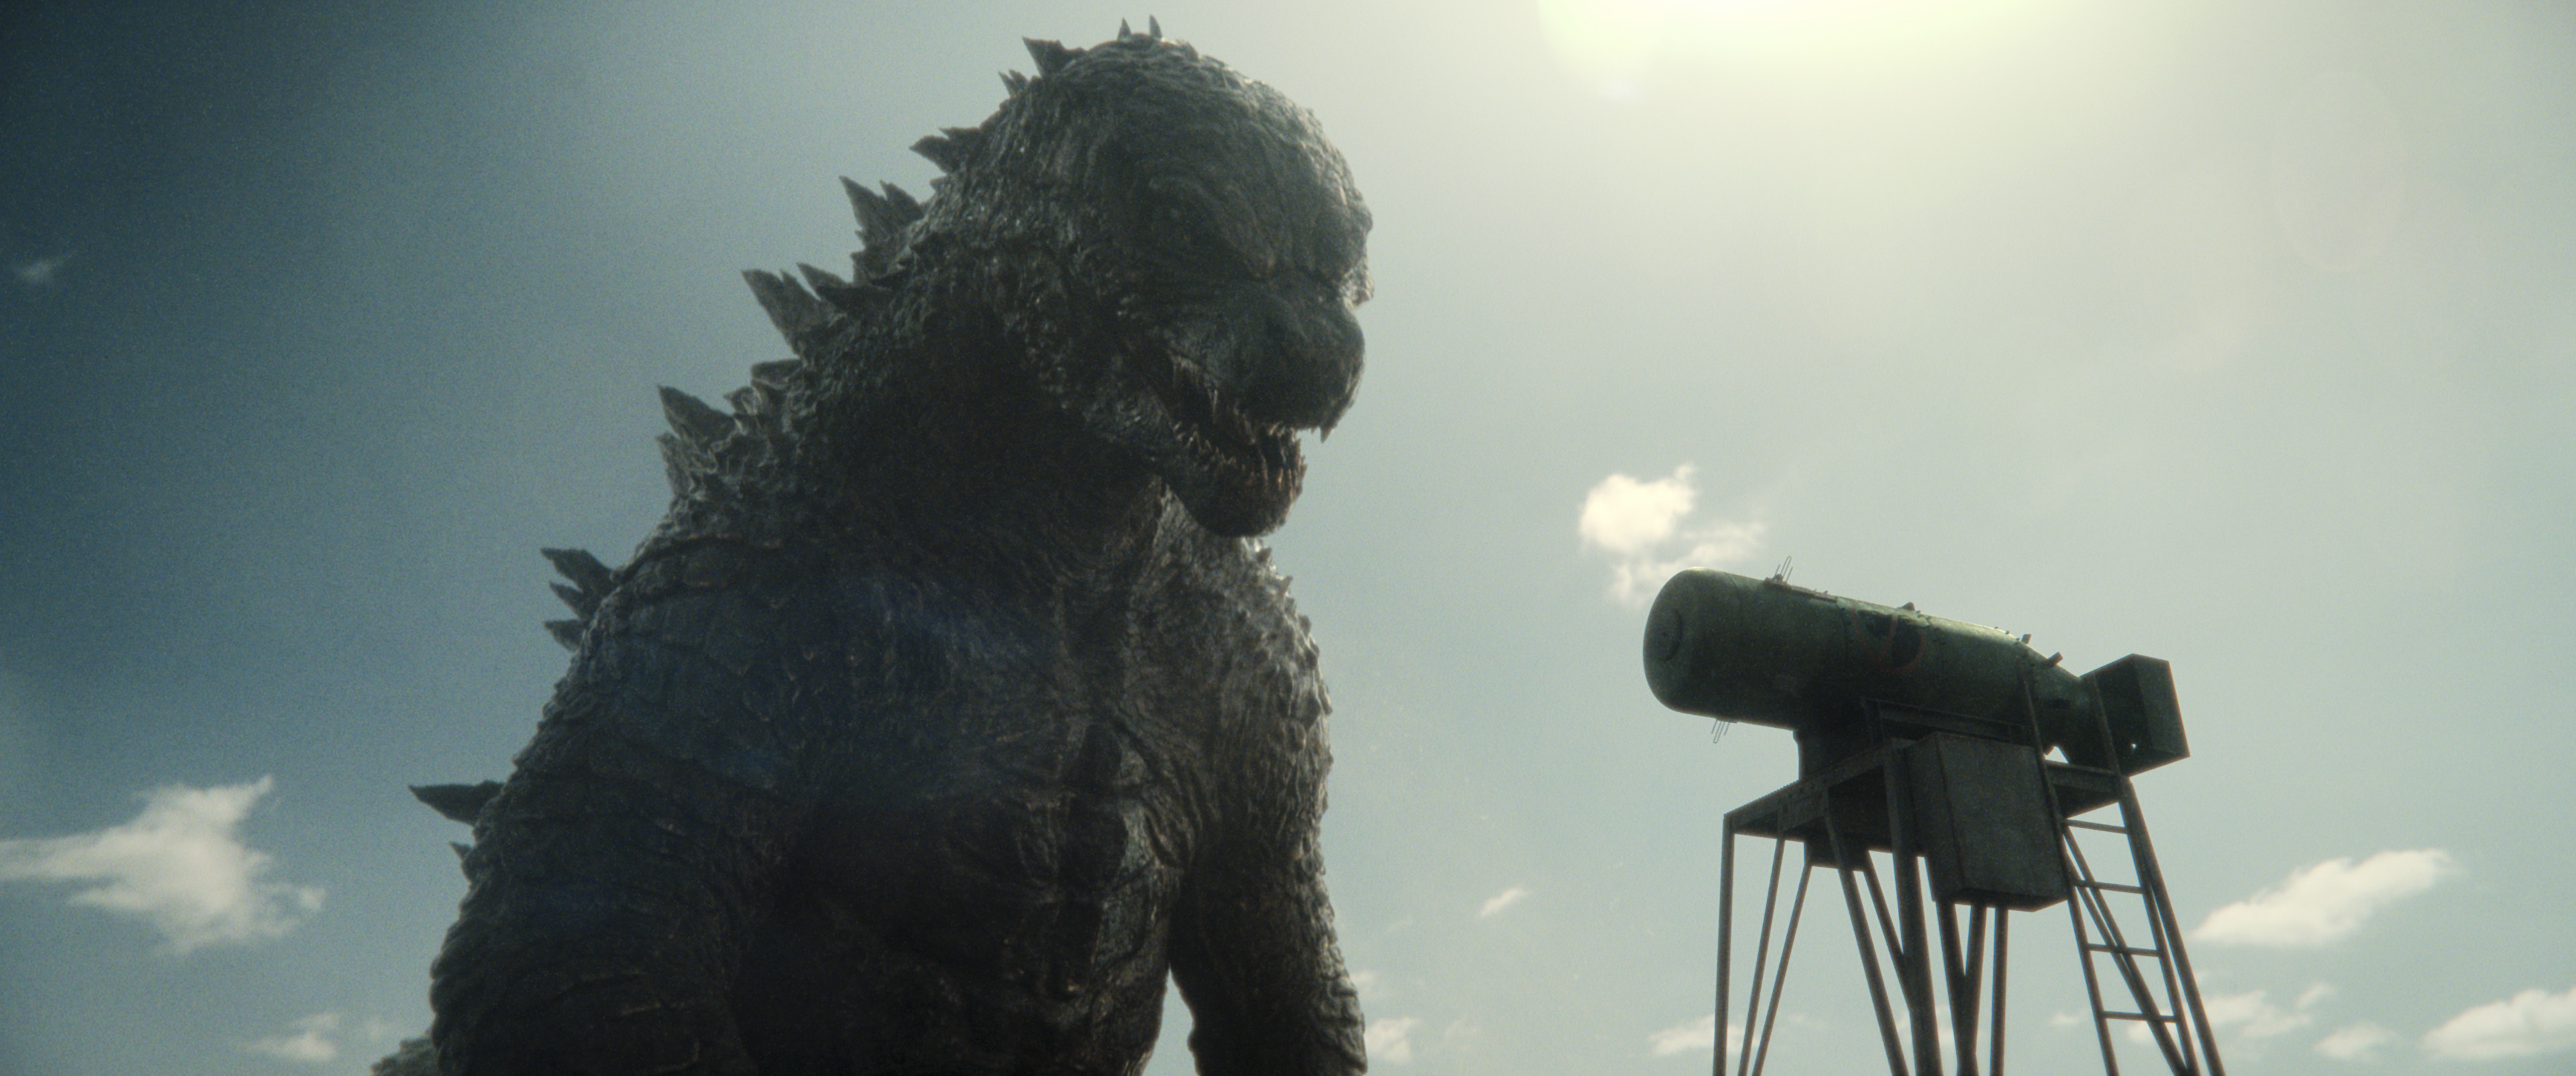 Godzilla looking down at a missile that looks small compared to him